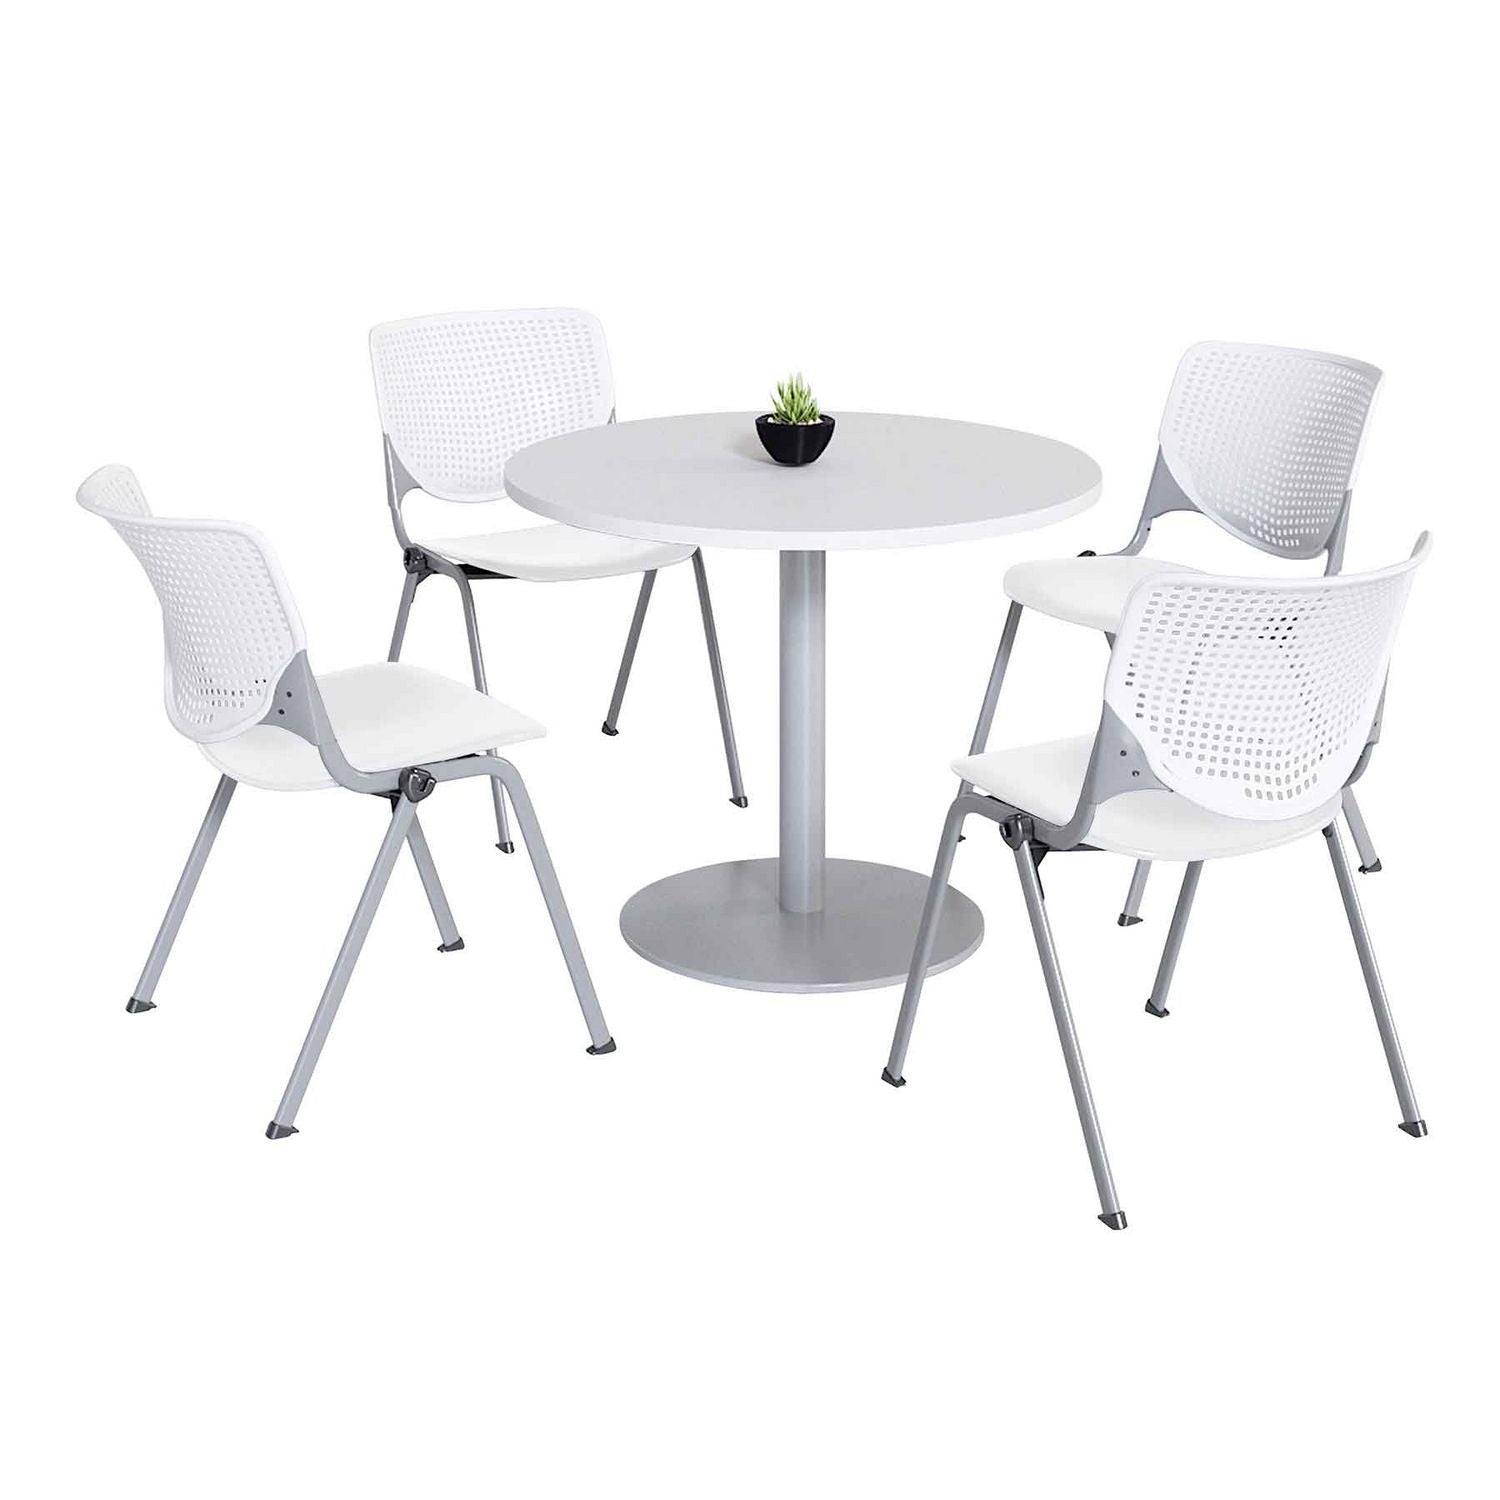 pedestal-table-with-four-white-kool-series-chairs-round-36-dia-x-29h-designer-white-ships-in-4-6-business-days_kfi811774036689 - 1